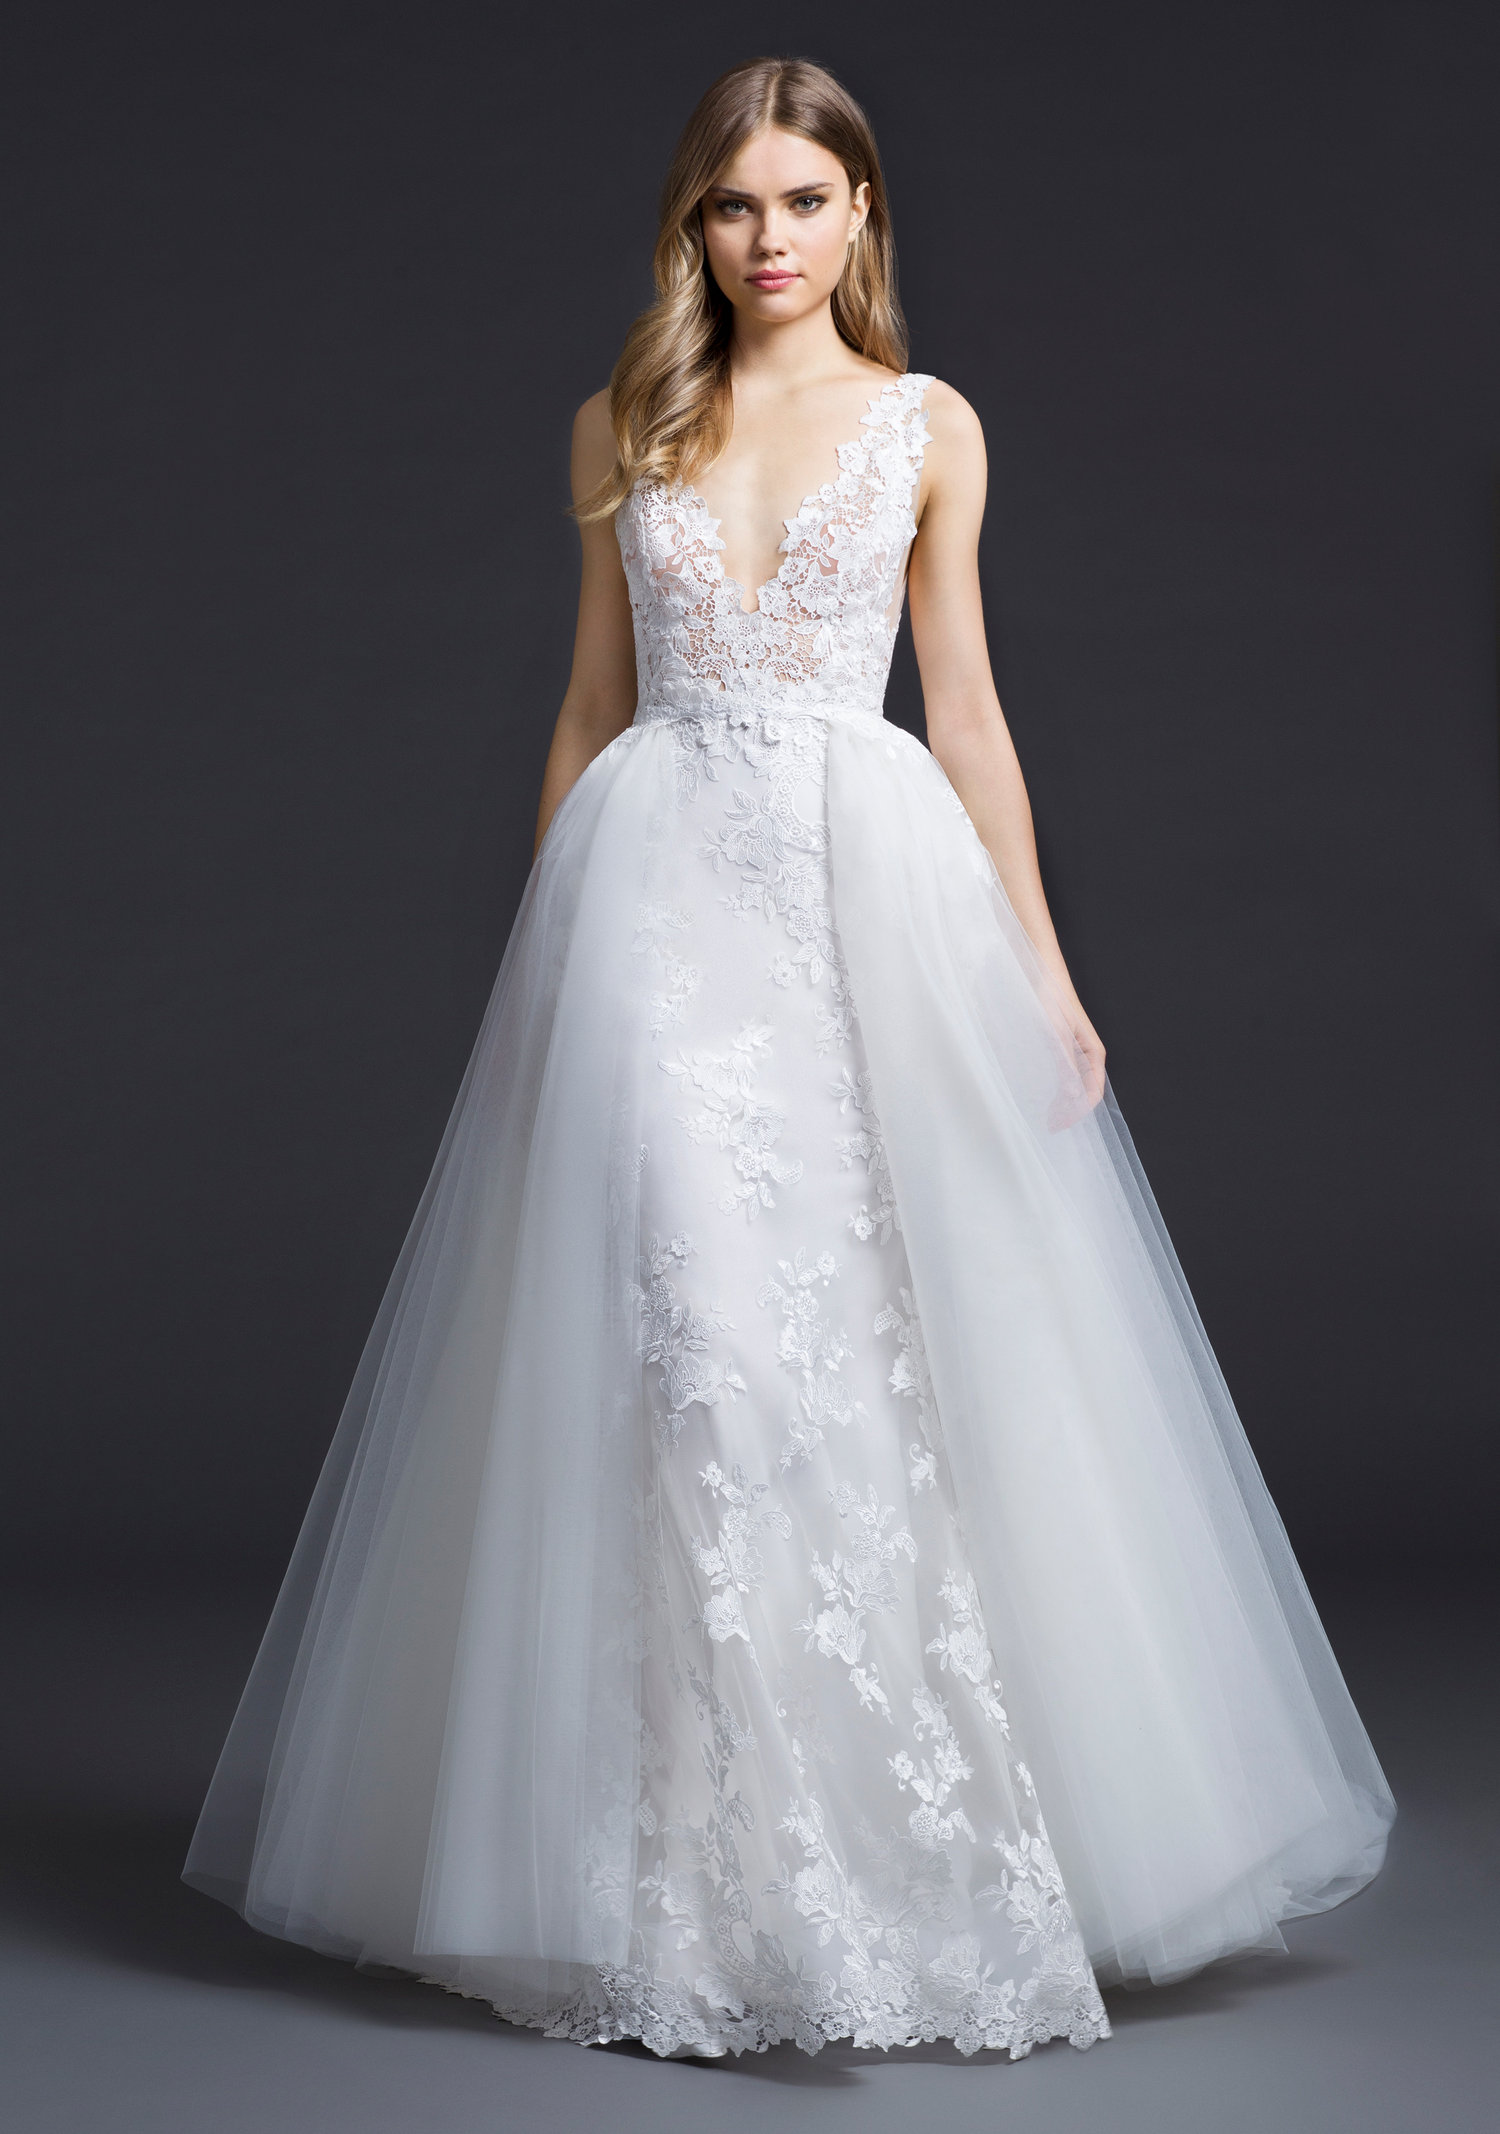 Choosing Between Dramatic and Simple Bridal Gowns for Your Wedding Day ...